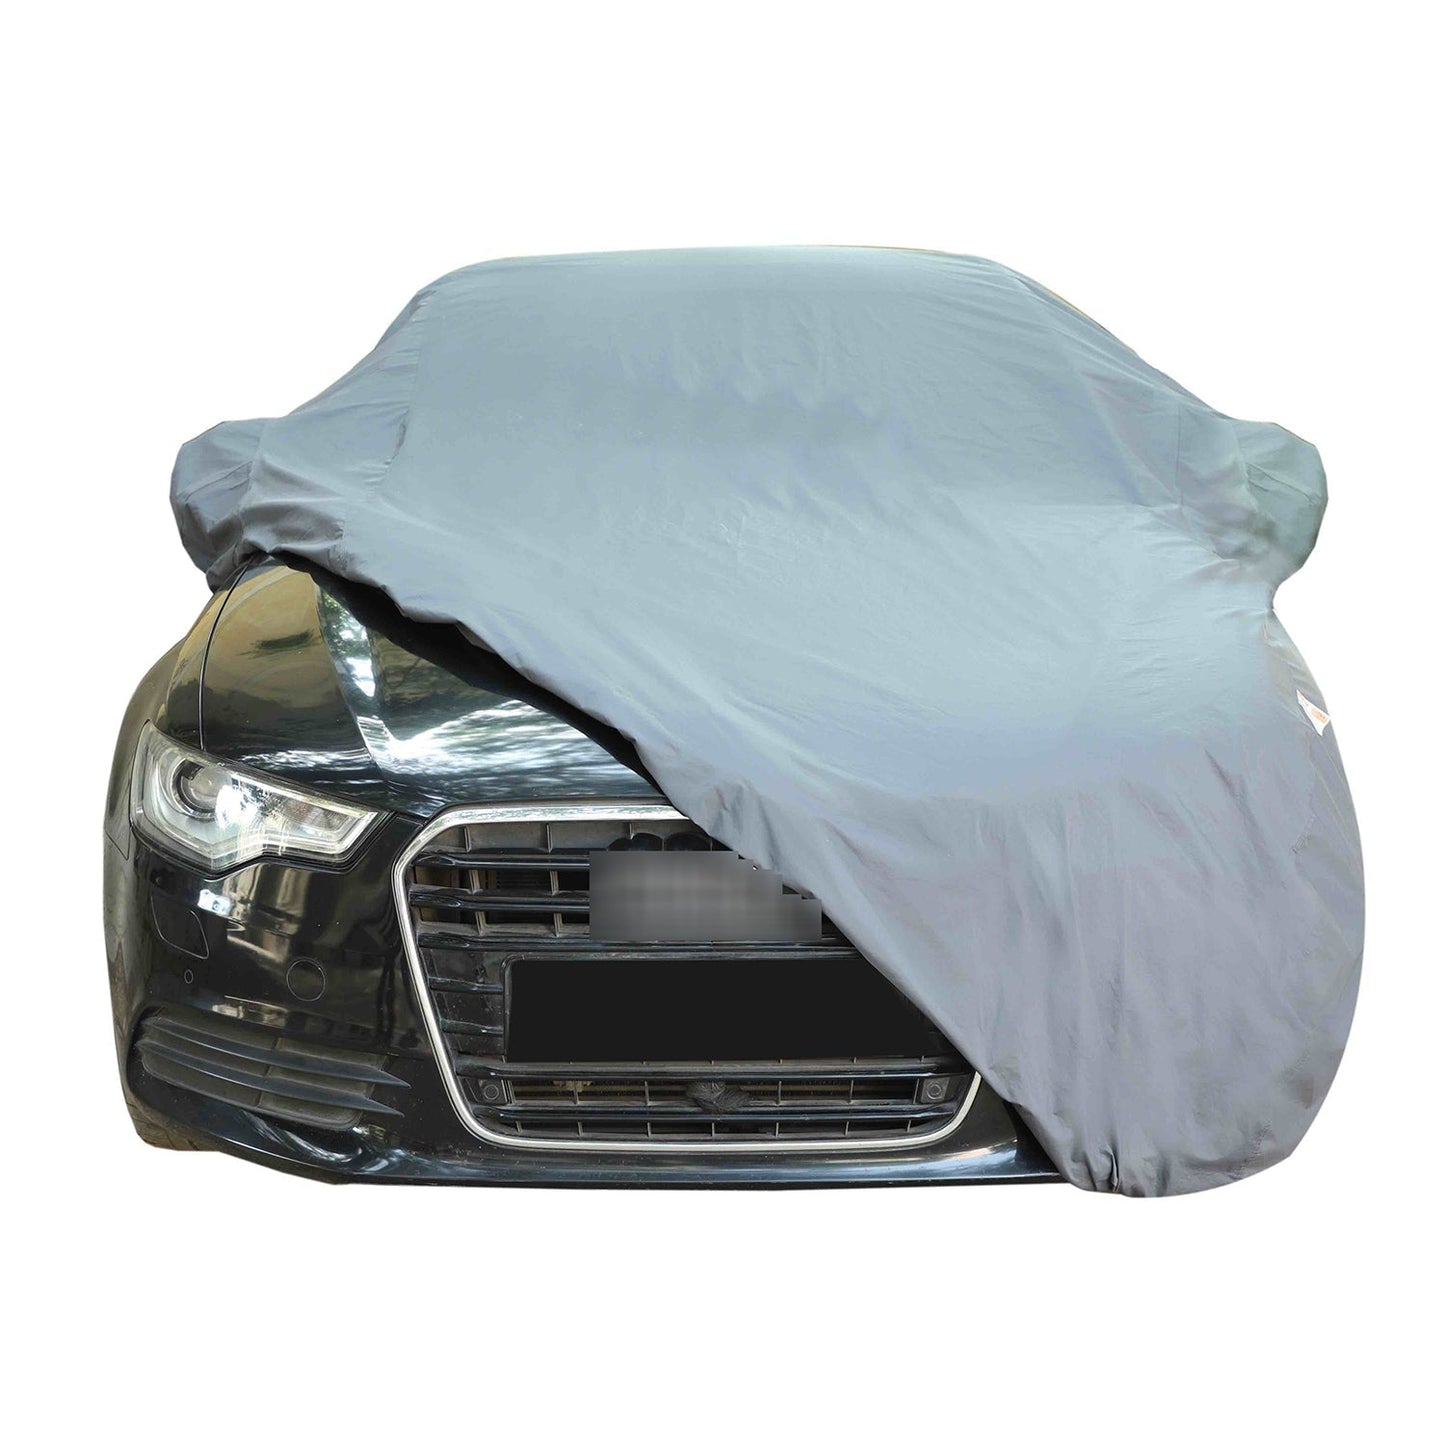 Oshotto Dark Grey 100% Anti Reflective, dustproof and Water Proof Car Body Cover with Mirror Pockets For Tata Punch